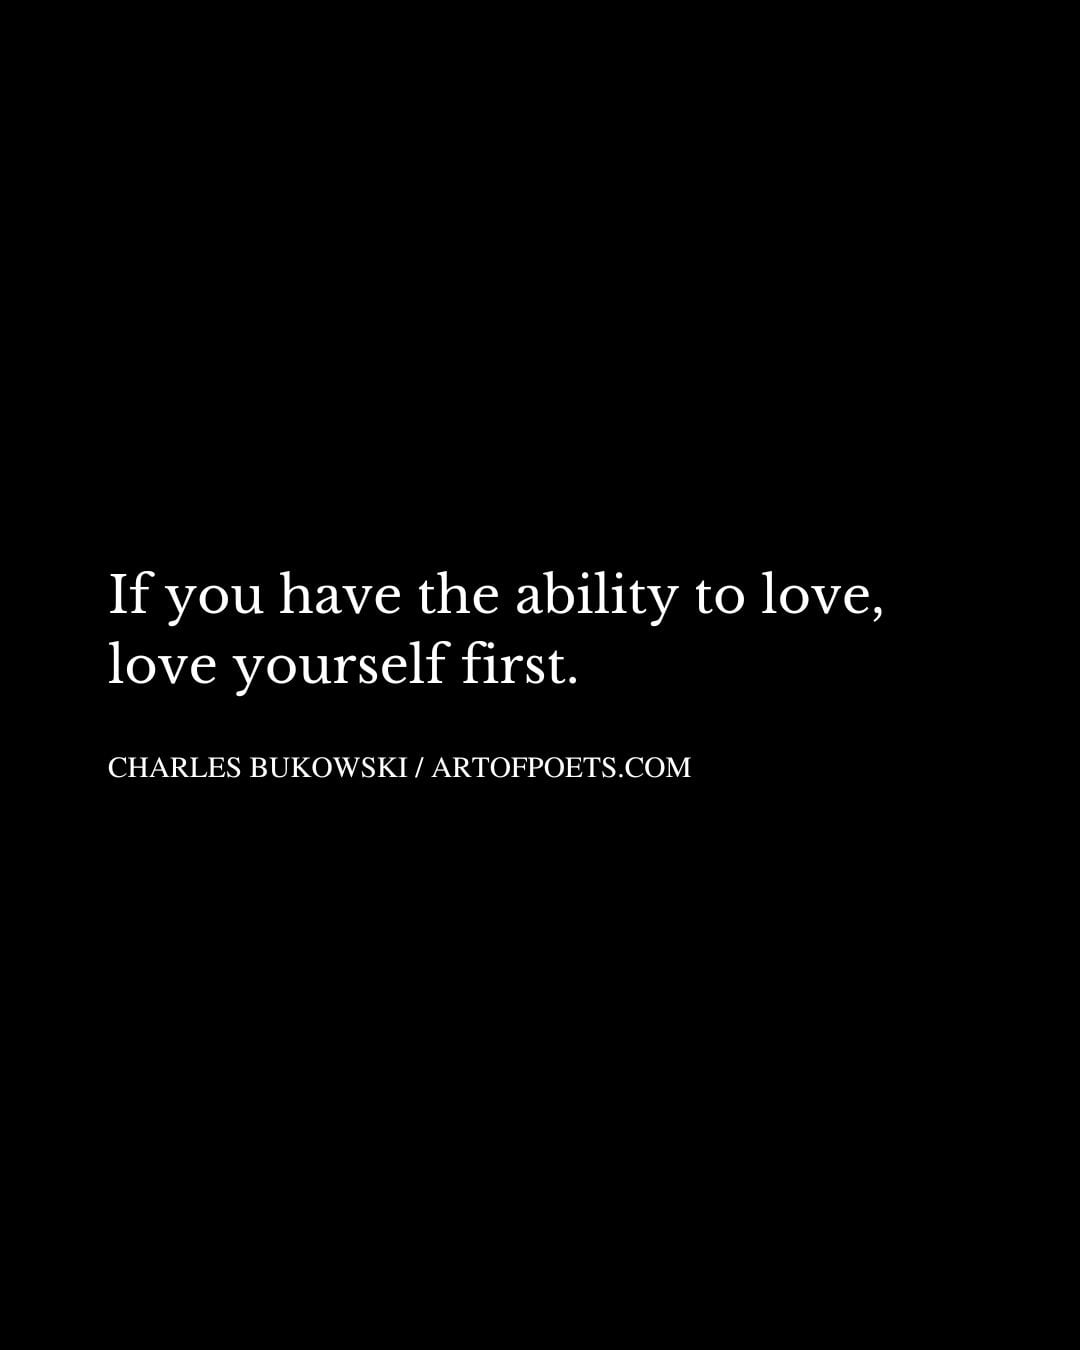 If you have the ability to love love yourself first